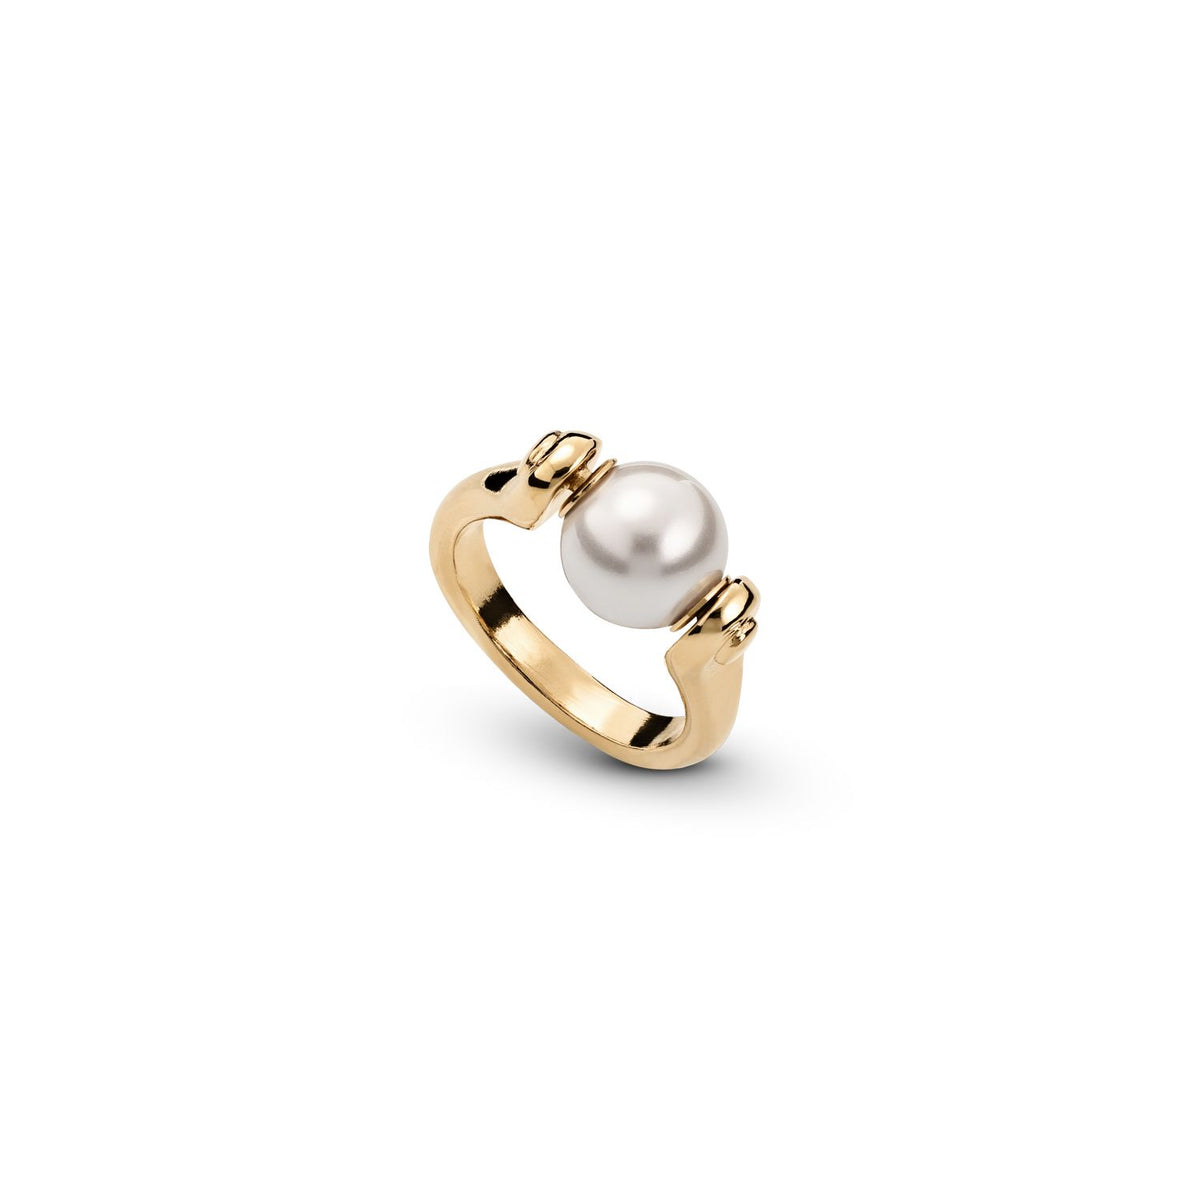 Uno de 50 Full Pearlmoon Ring – Citrus and Moss